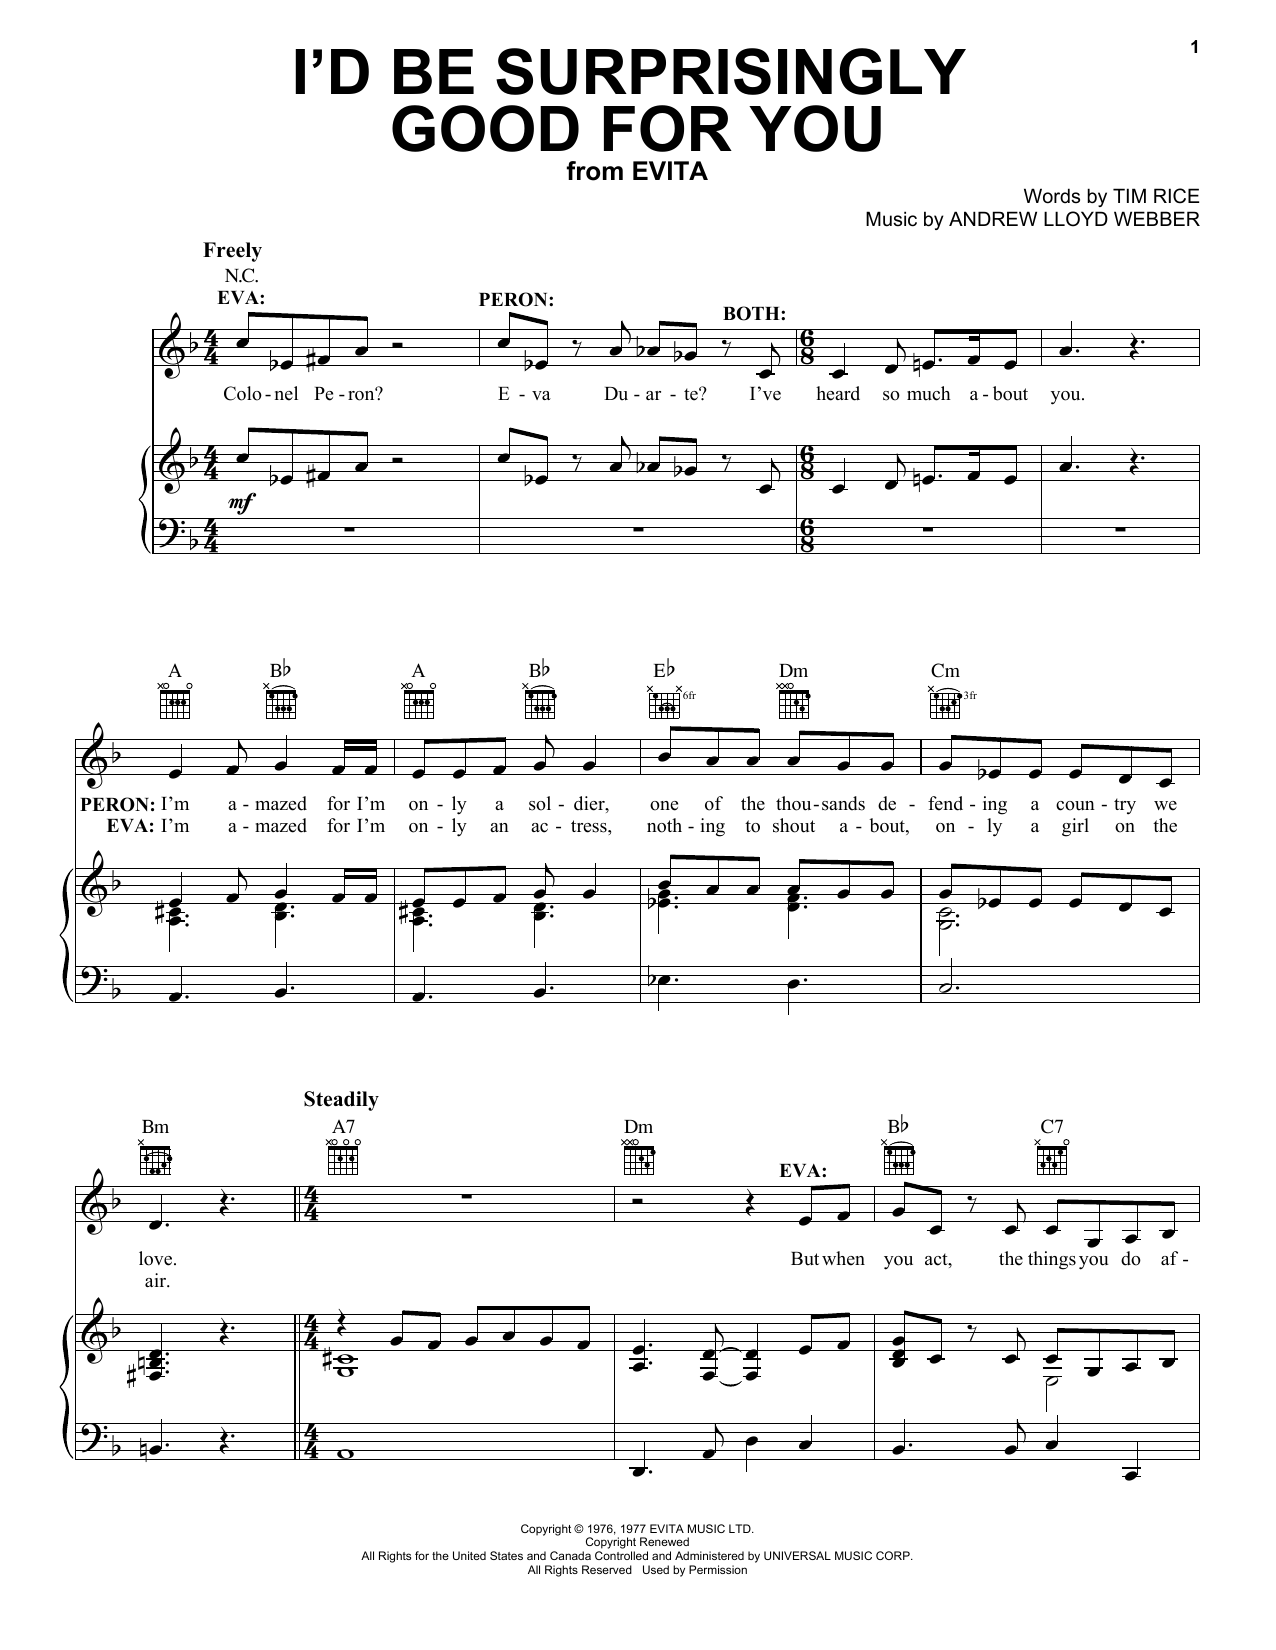 Andrew Lloyd Webber I'd Be Surprisingly Good For You (from Evita) sheet music notes and chords. Download Printable PDF.